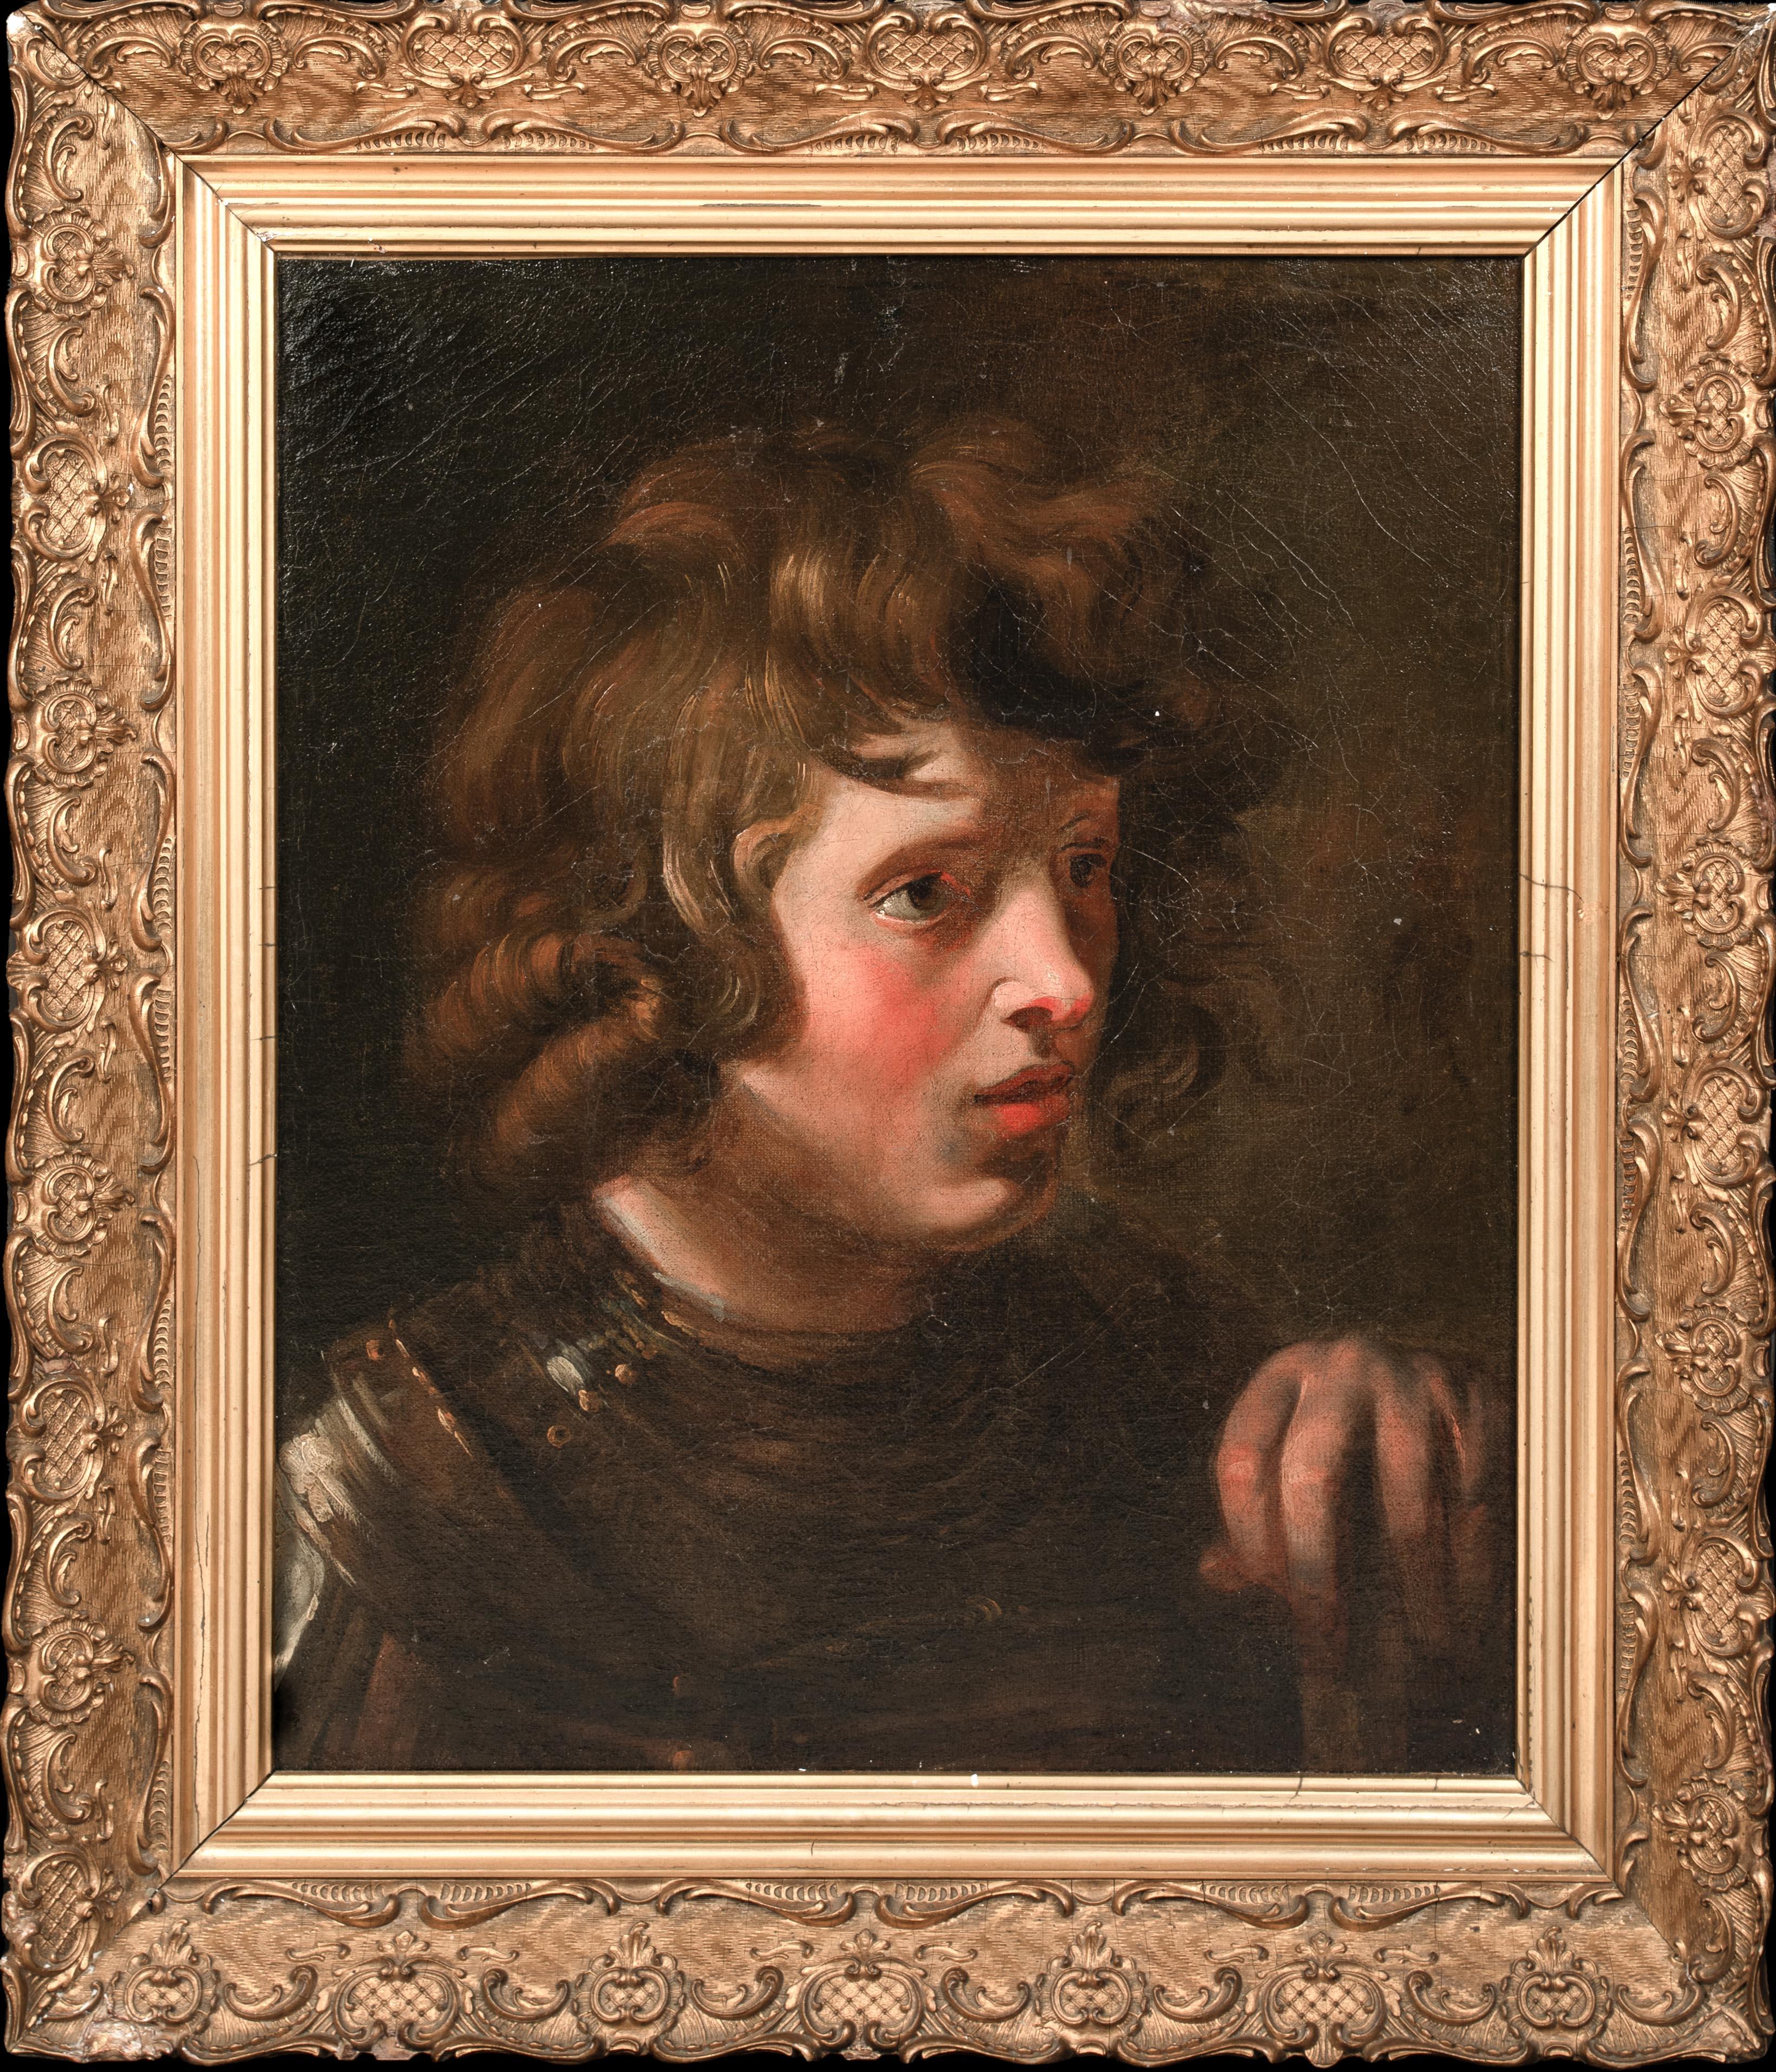 Study Of David, 17th Century

School Of Peter Paul Rubens (1577-1640)

17th Century Dutch study of the head of David before the battle against Goliath & The Philistines, oil on canvas. Excellent quality and condition early study of the head of a